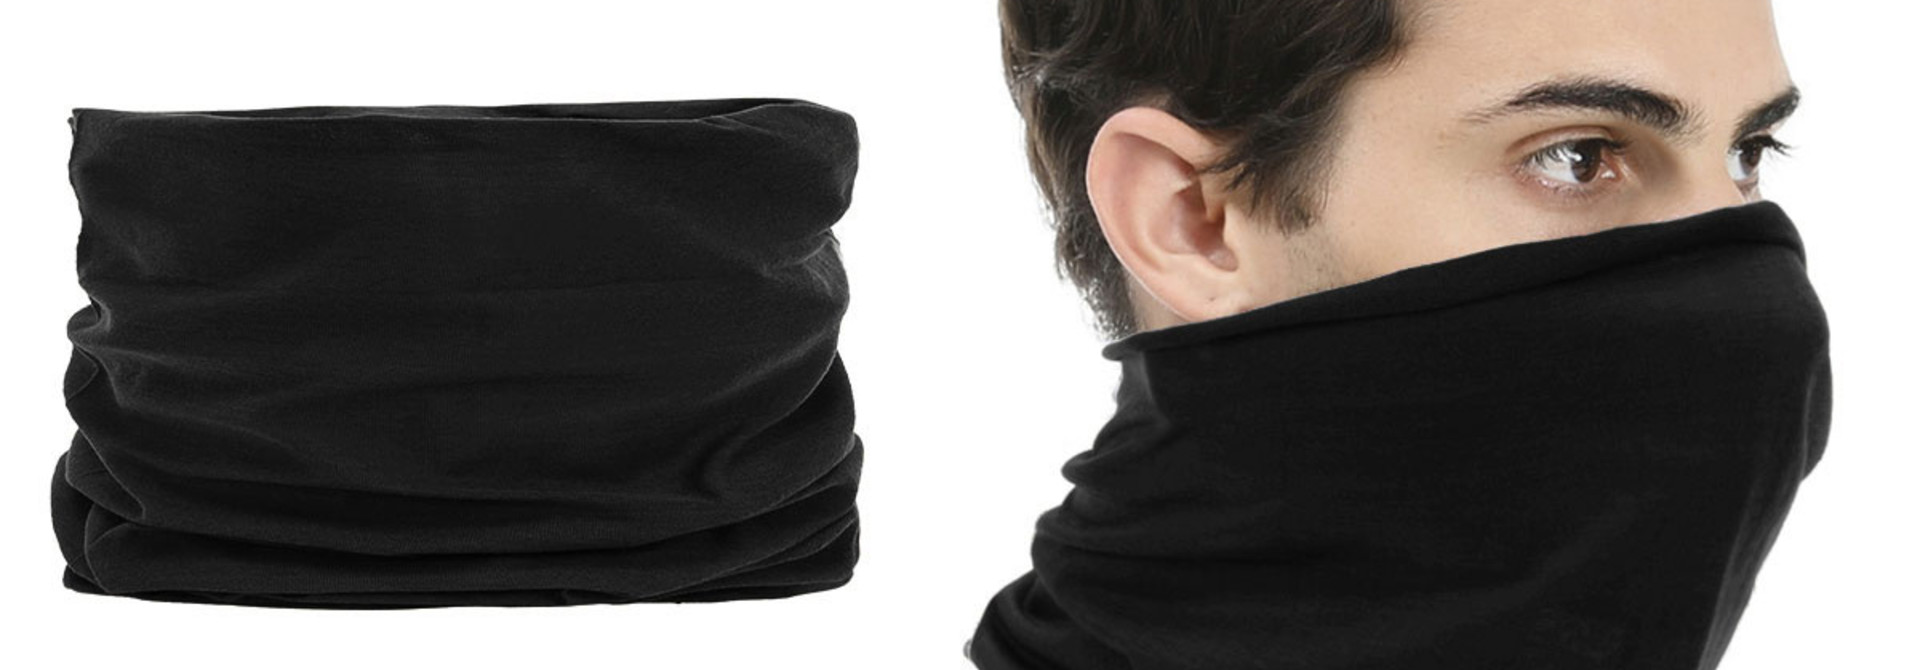 6  Pieces Multi-functional Polyester Cowl Neck Scarf  - Bandana - Balaclava - Ideal for Sports Cycling Motorbike - Unisex - Black